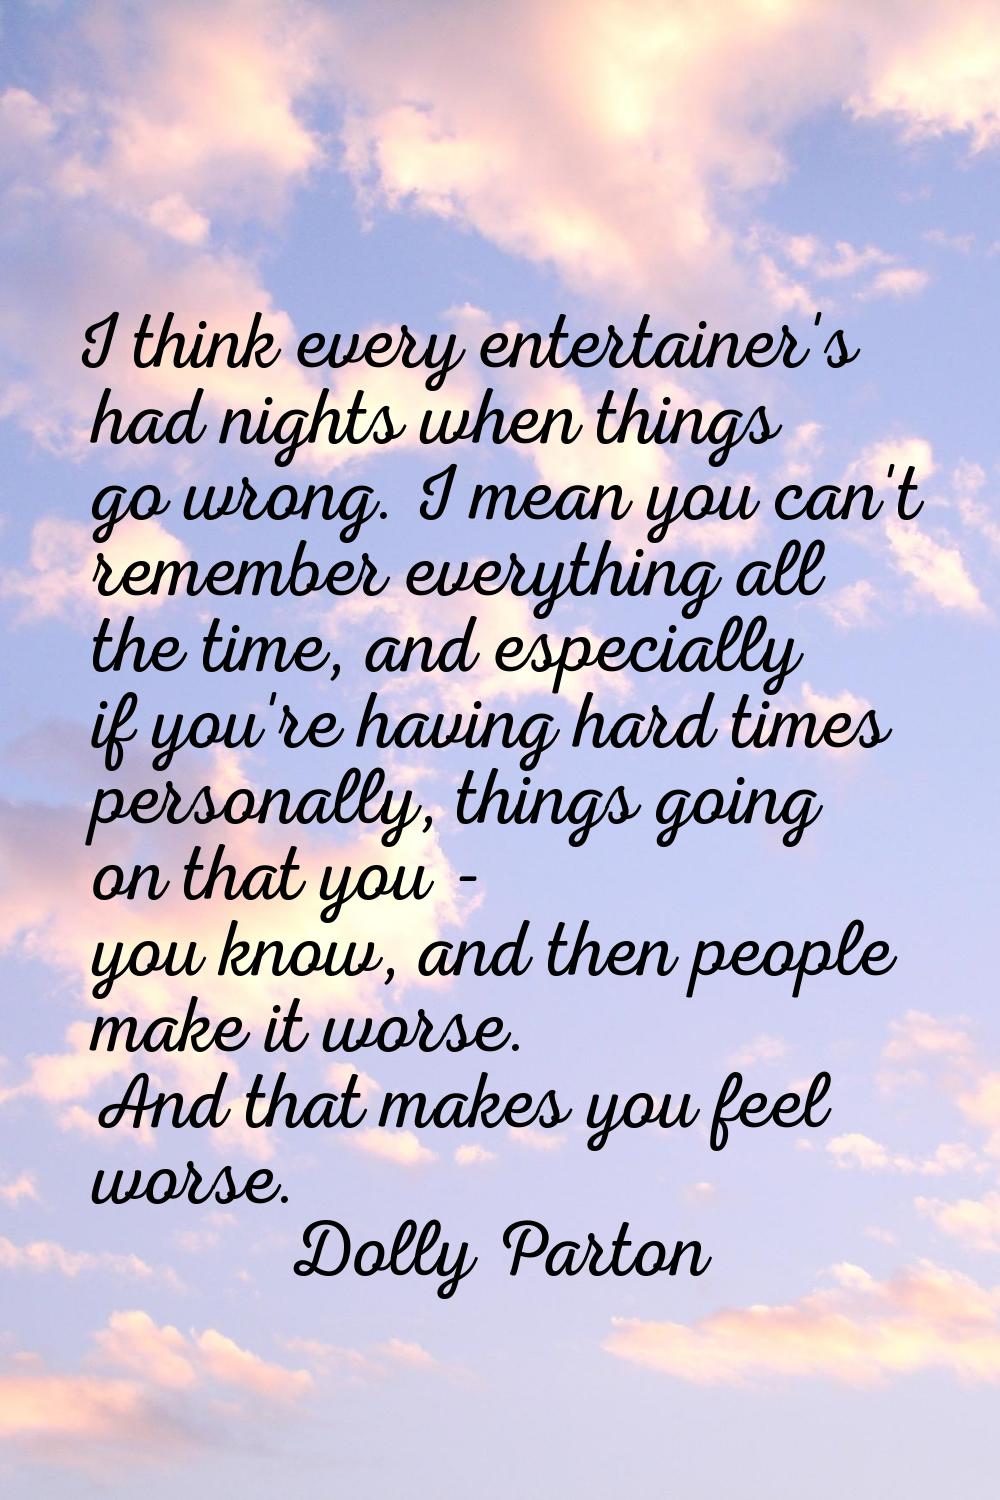 I think every entertainer's had nights when things go wrong. I mean you can't remember everything a